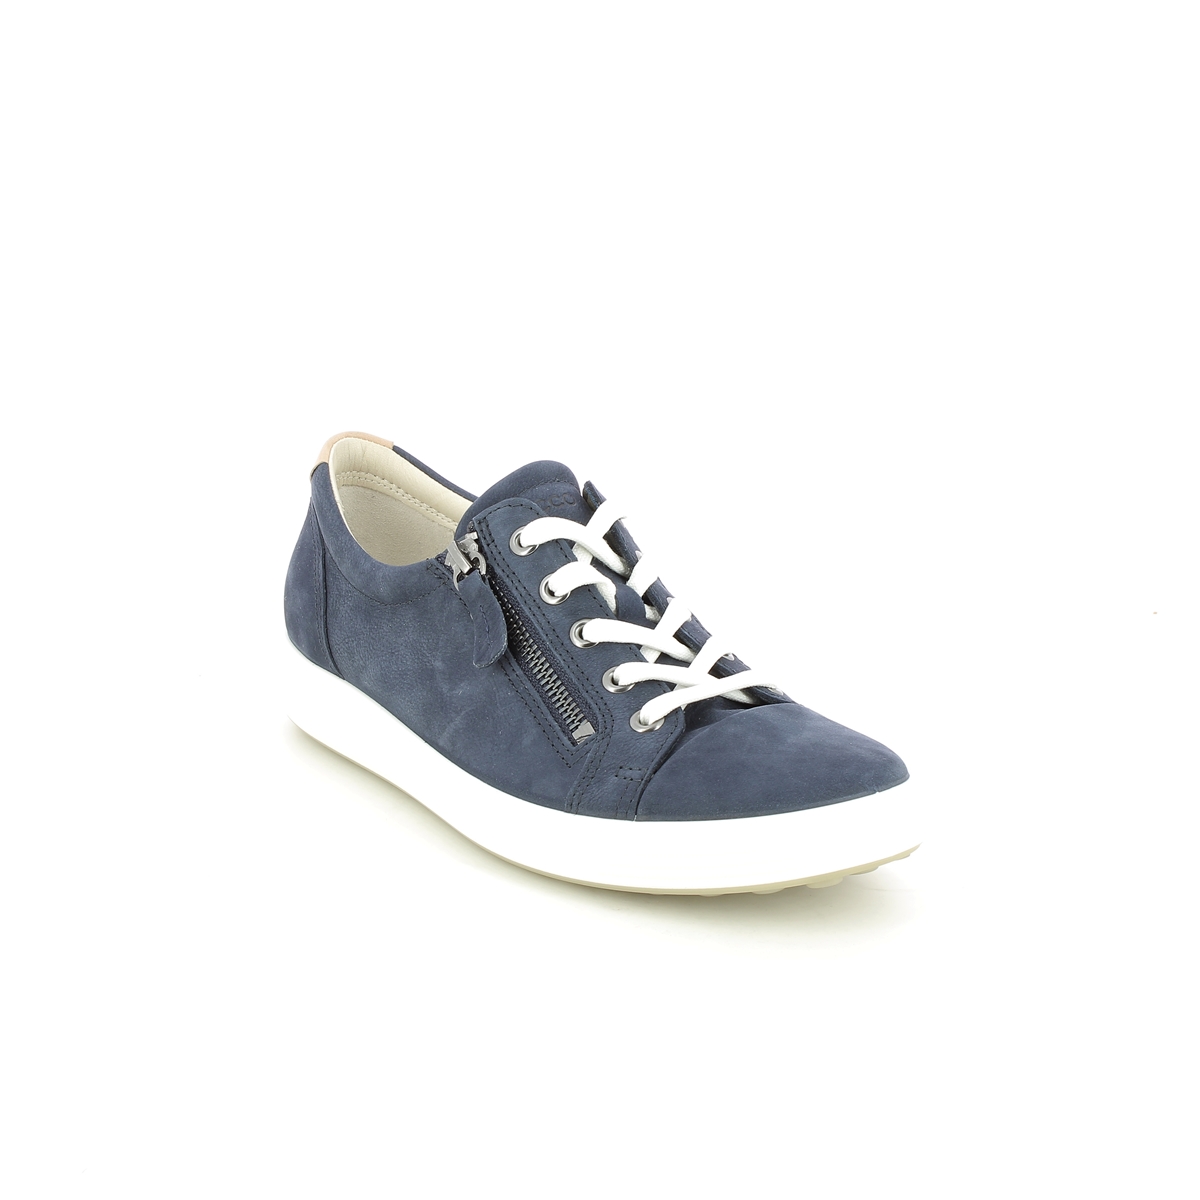 Ecco Soft 7 Lace Zip Navy Nubuck Womens Trainers 430853-02303 In Size 38 In Plain Navy Nubuck